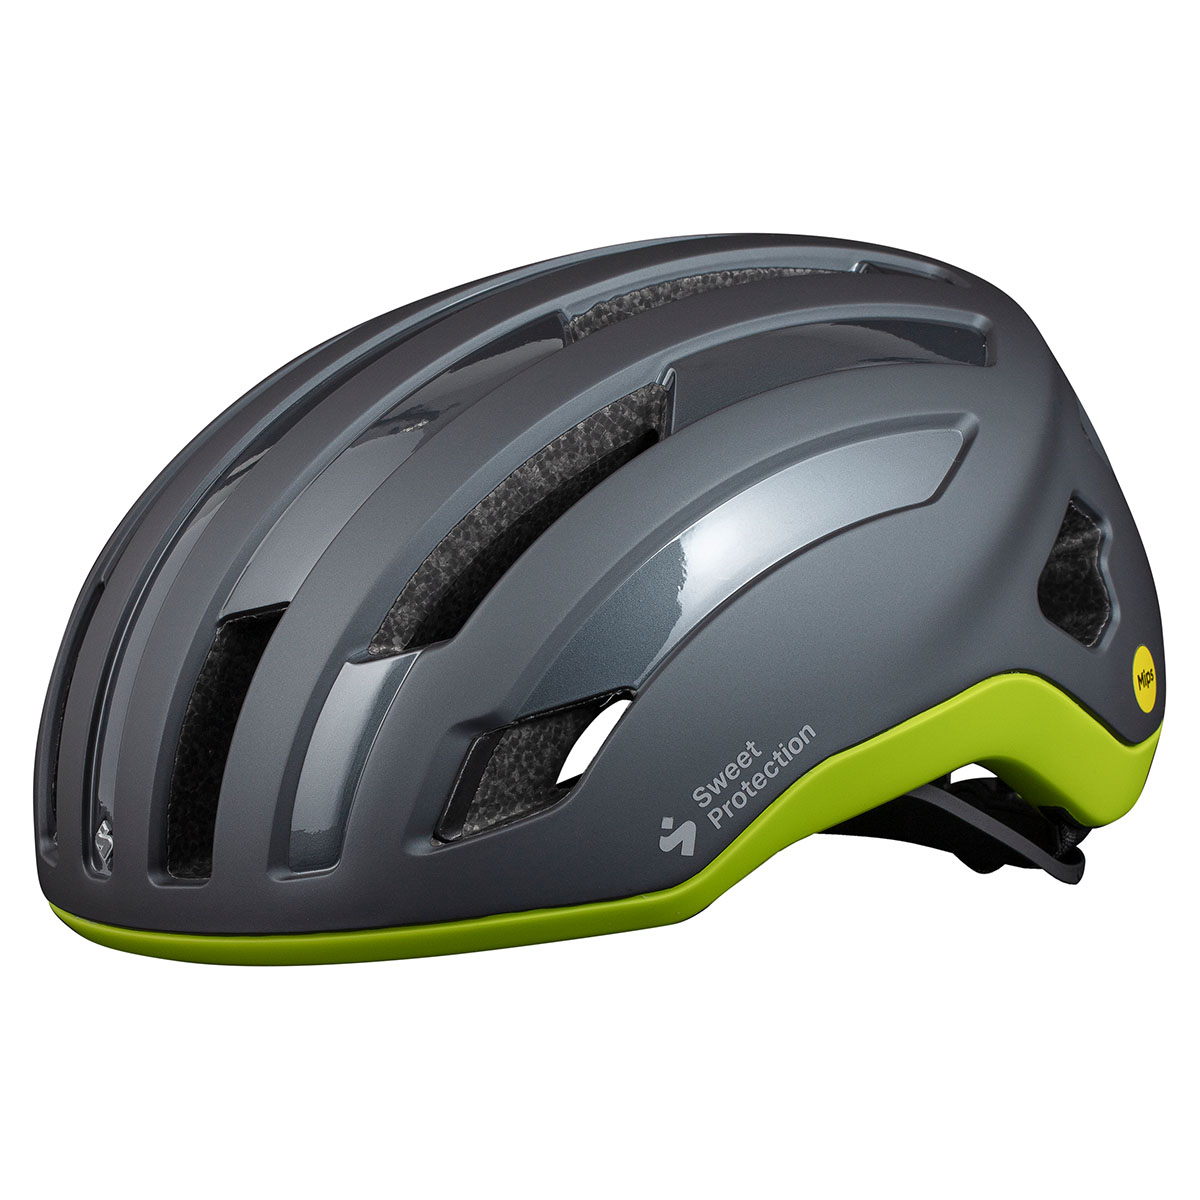 CASQUE SWEET PROTECTION OUTRIDER MIPS GRIS/JAUNE FLUO MEDIUM